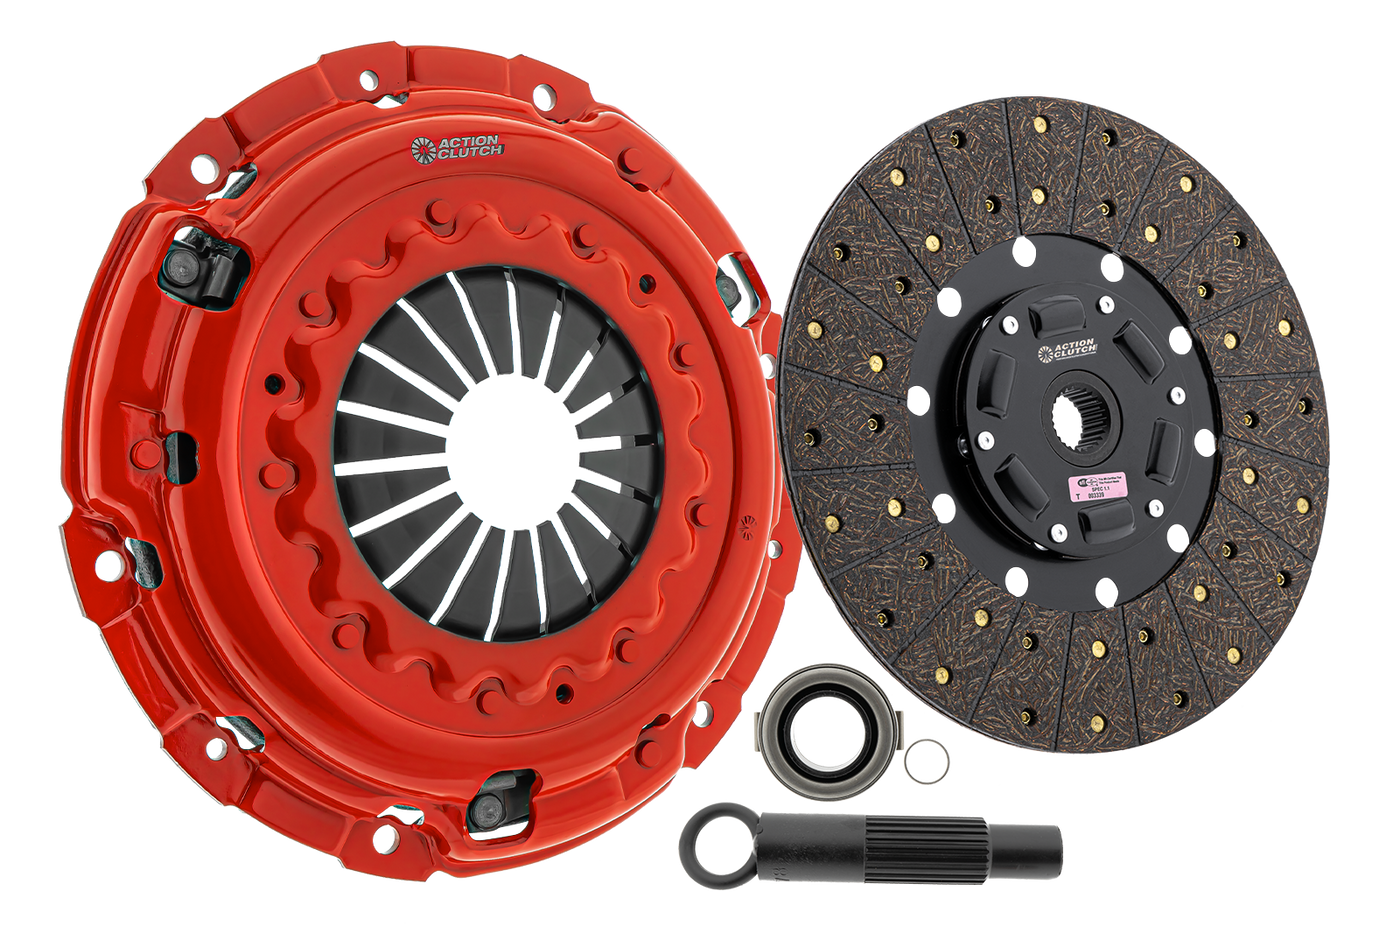 Stage 1 Clutch Kit (1OS) for Honda Prelude 1988-1989 2.0L (B20A5)